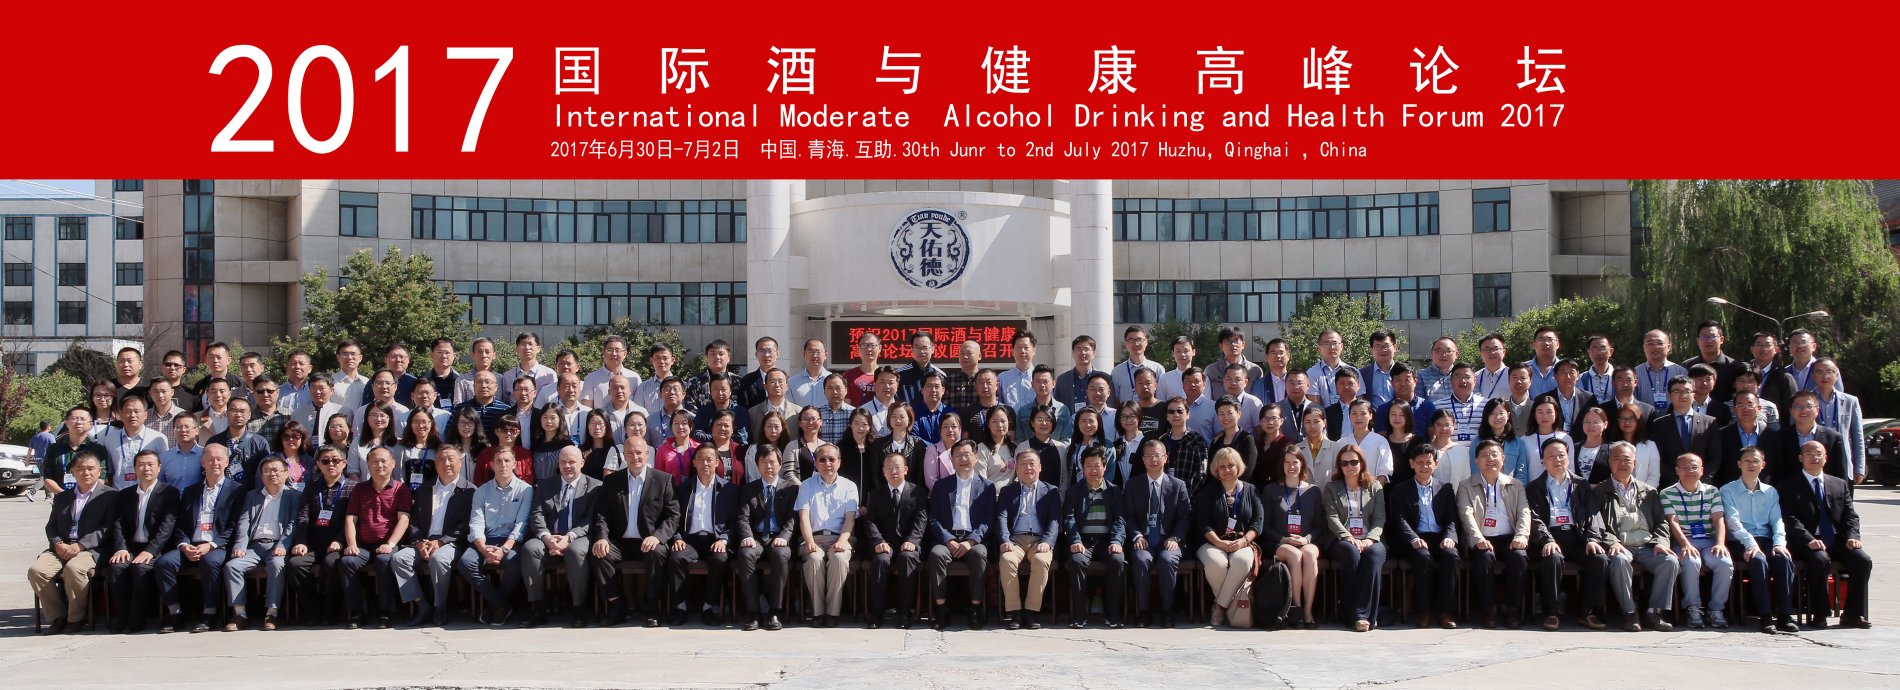 International Moderate Alcohol Drinking and Health Forum